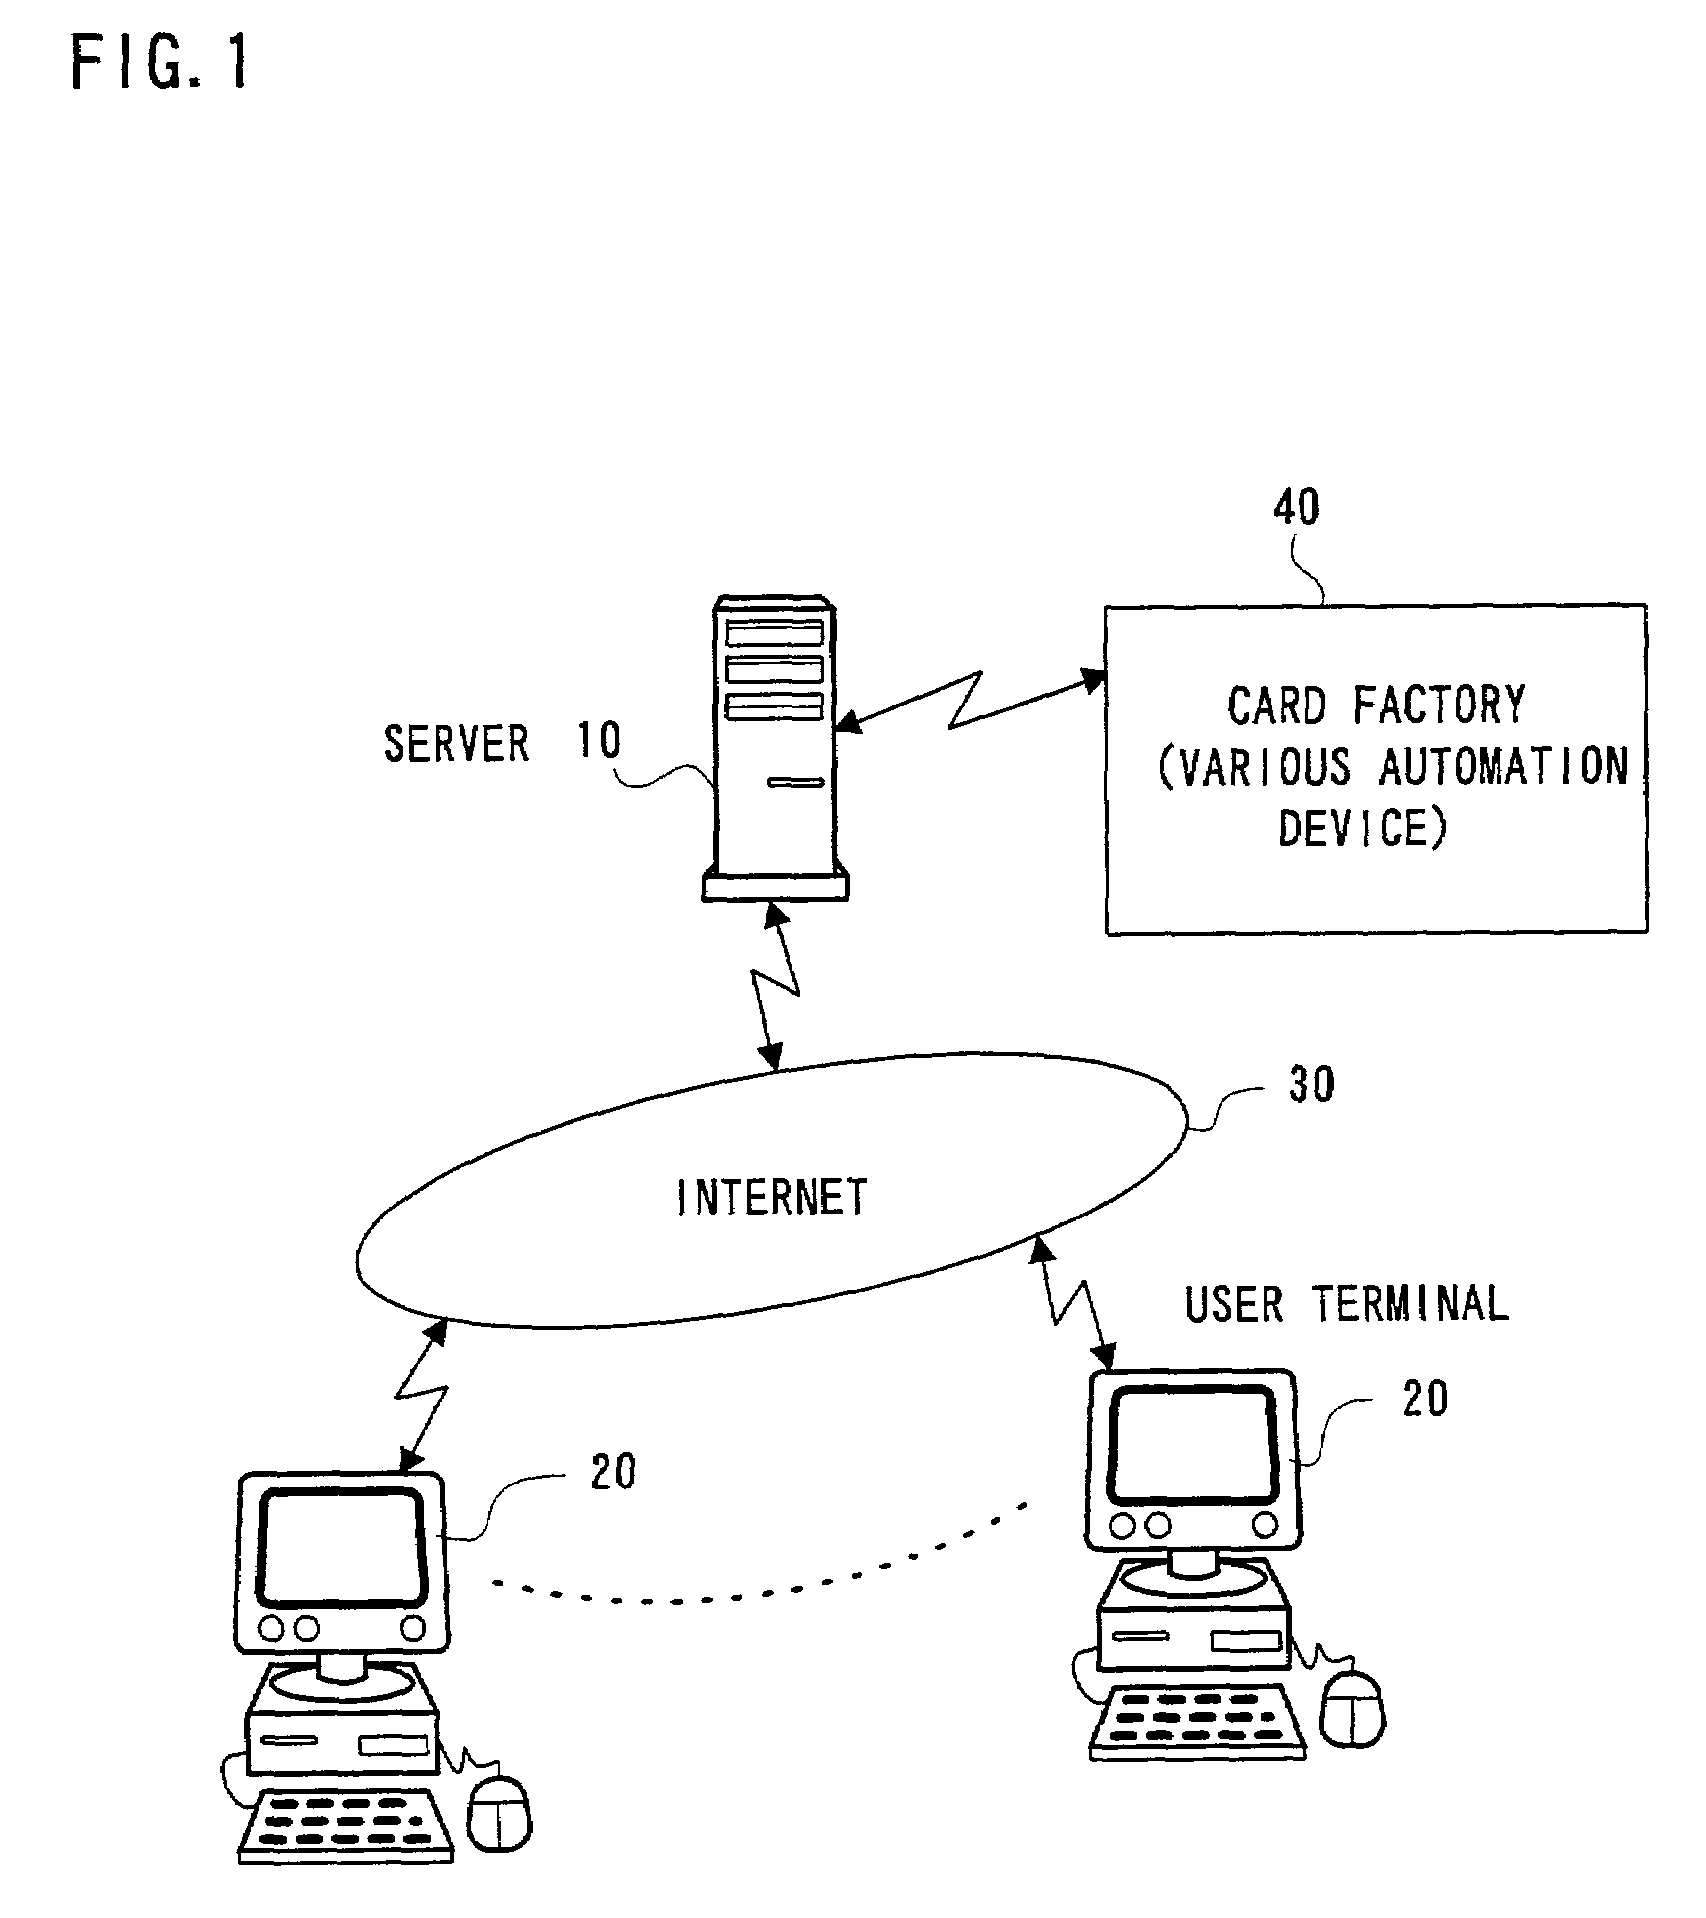 System and method for electronic business transaction of trading cards